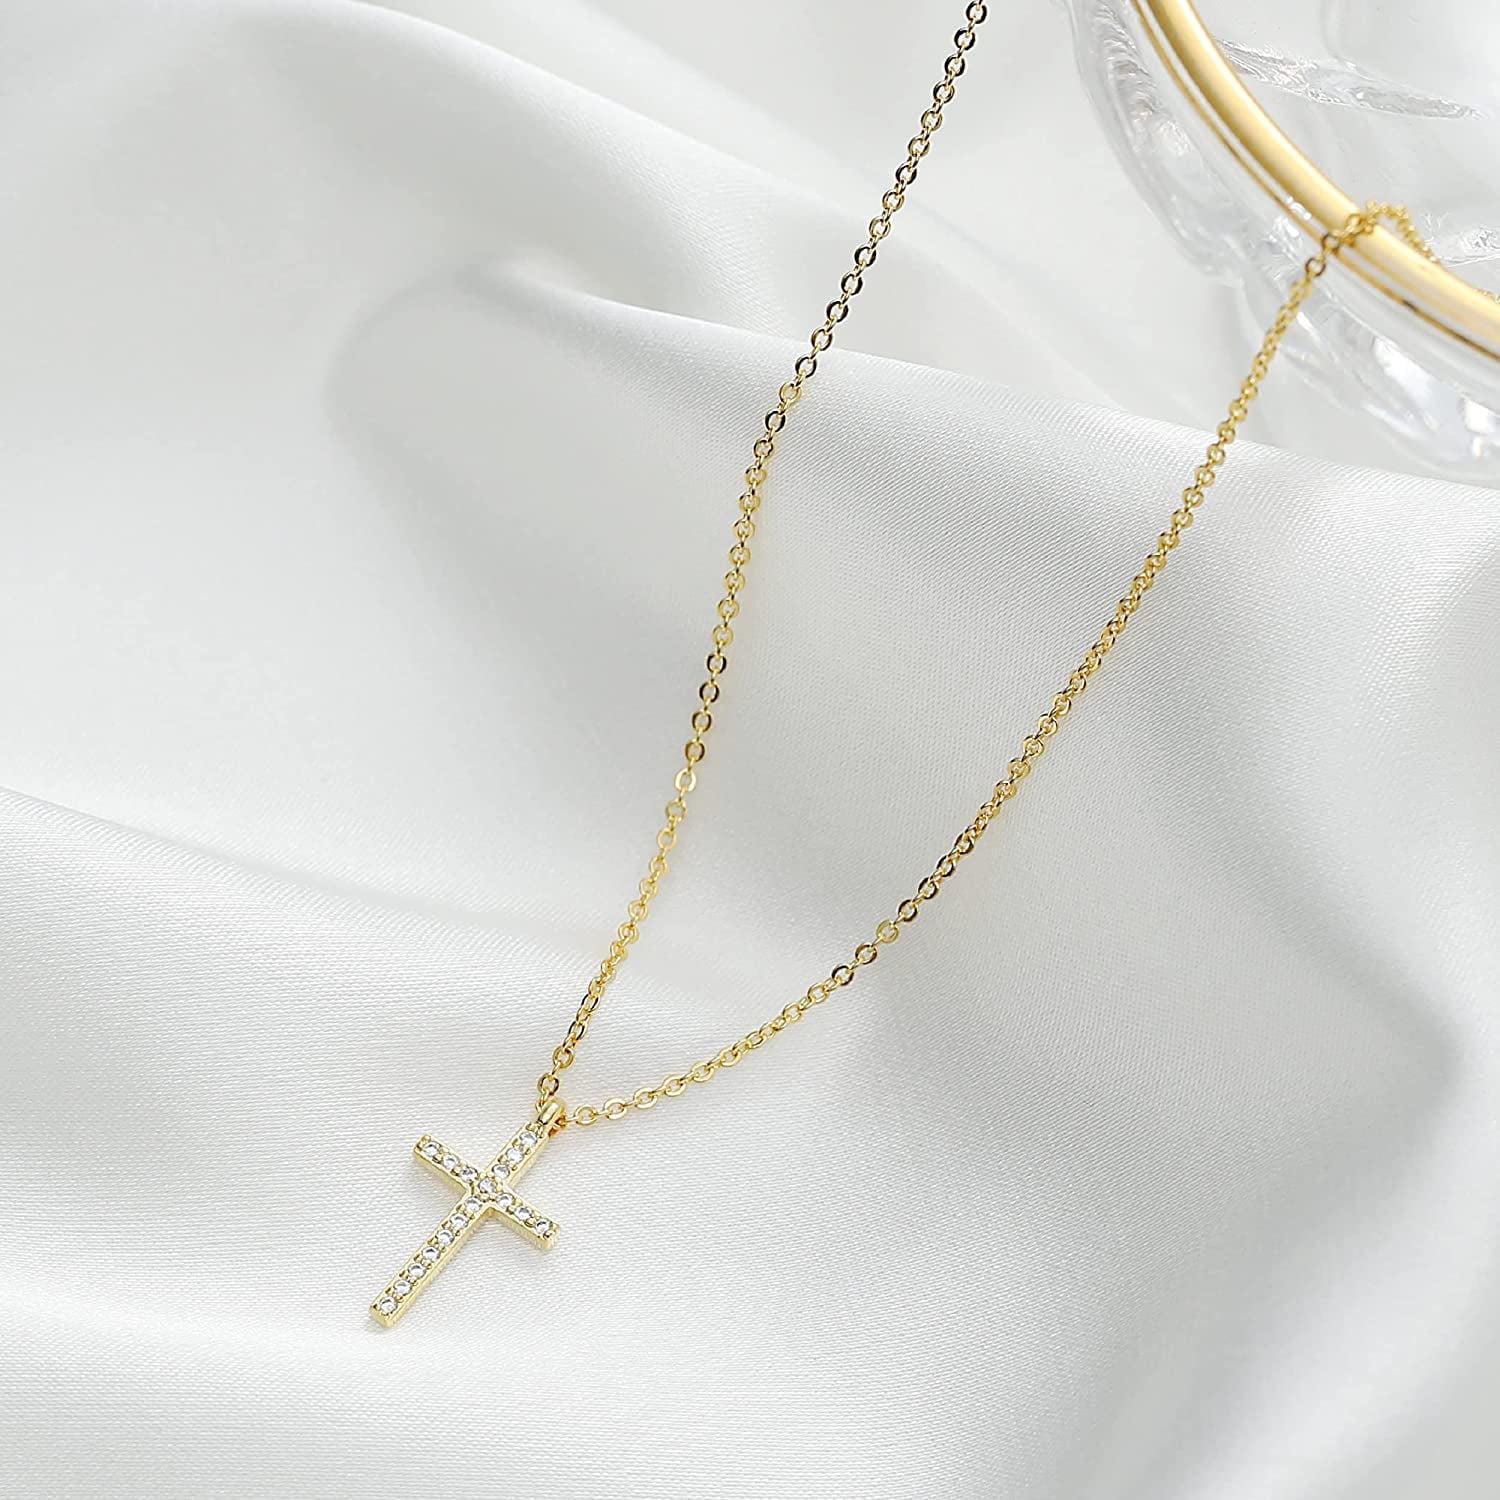 Women's Hammered Gold Cross Necklace | Atrio Hill